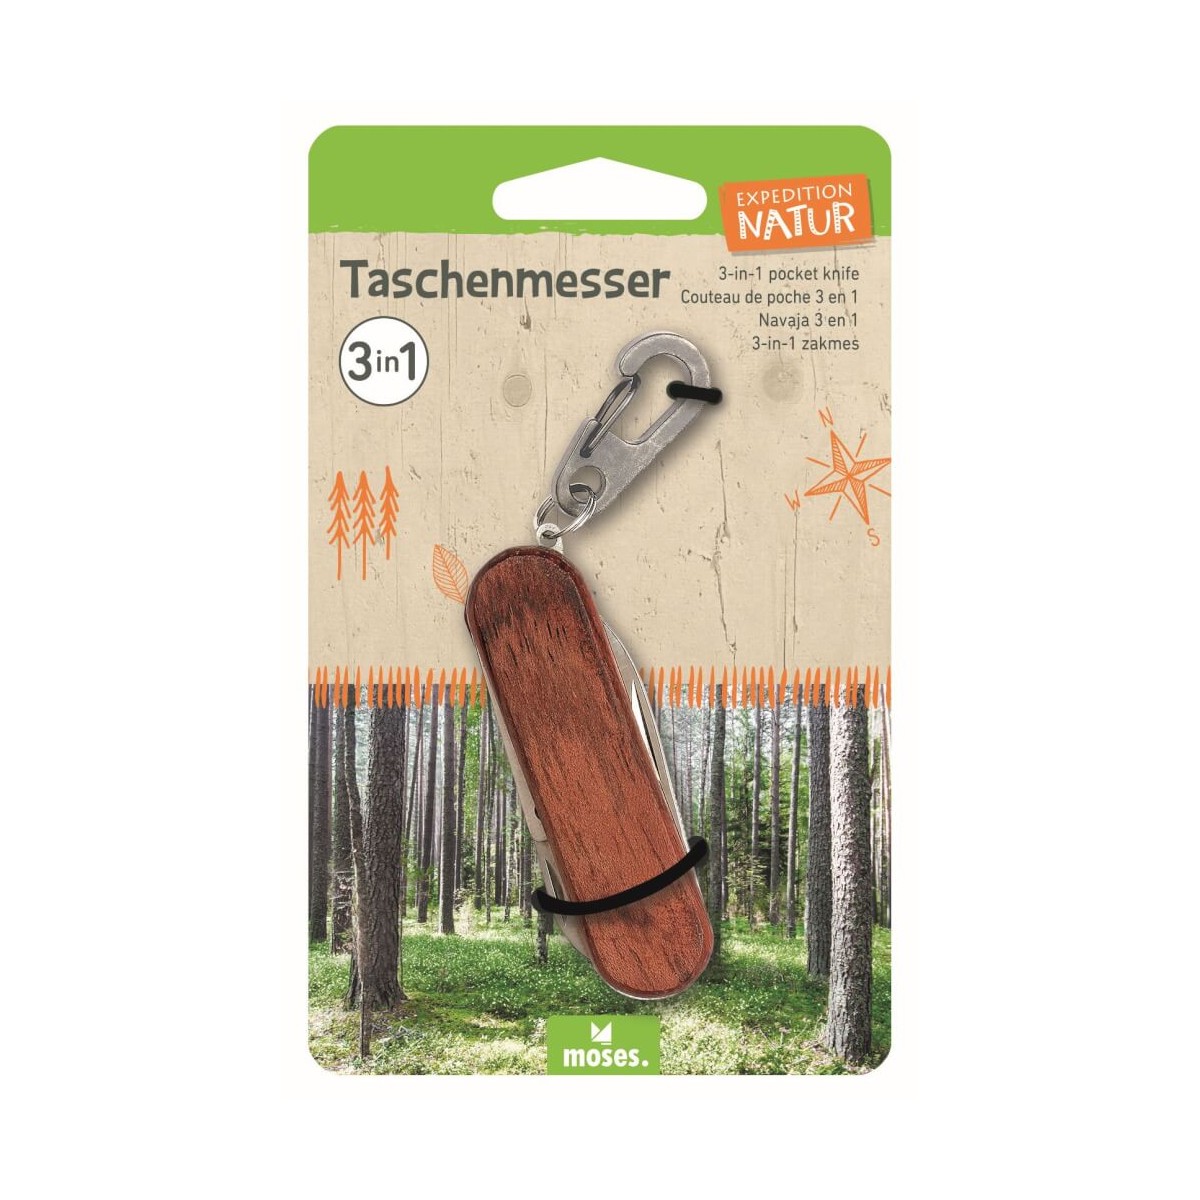 Expedition Natur Taschenmesse